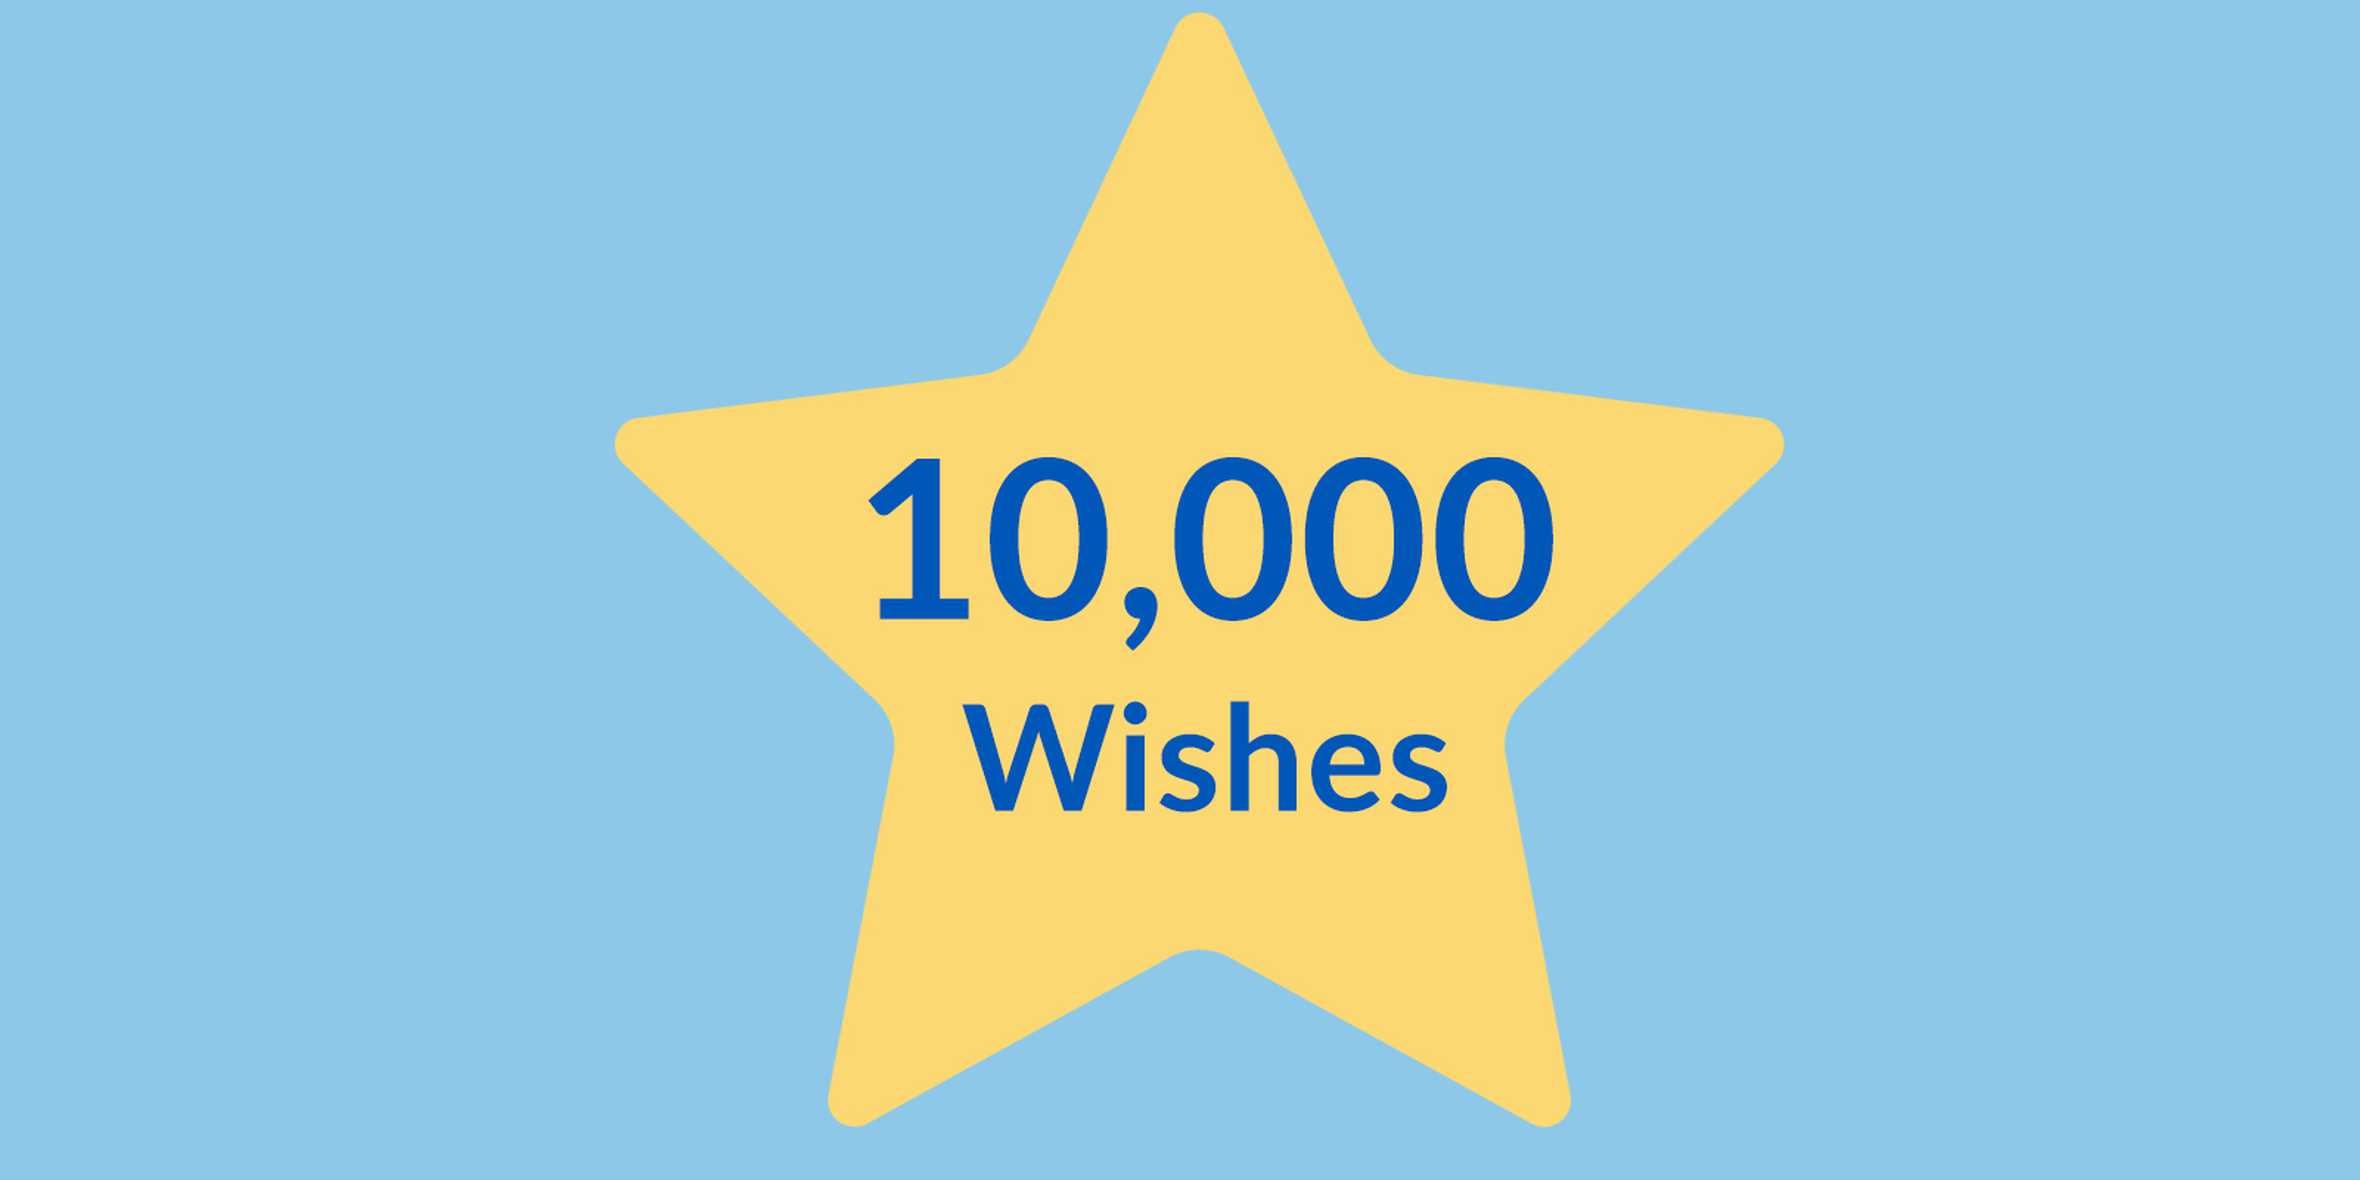 A yellow star on a blue background with the words '10,000 wishes'.